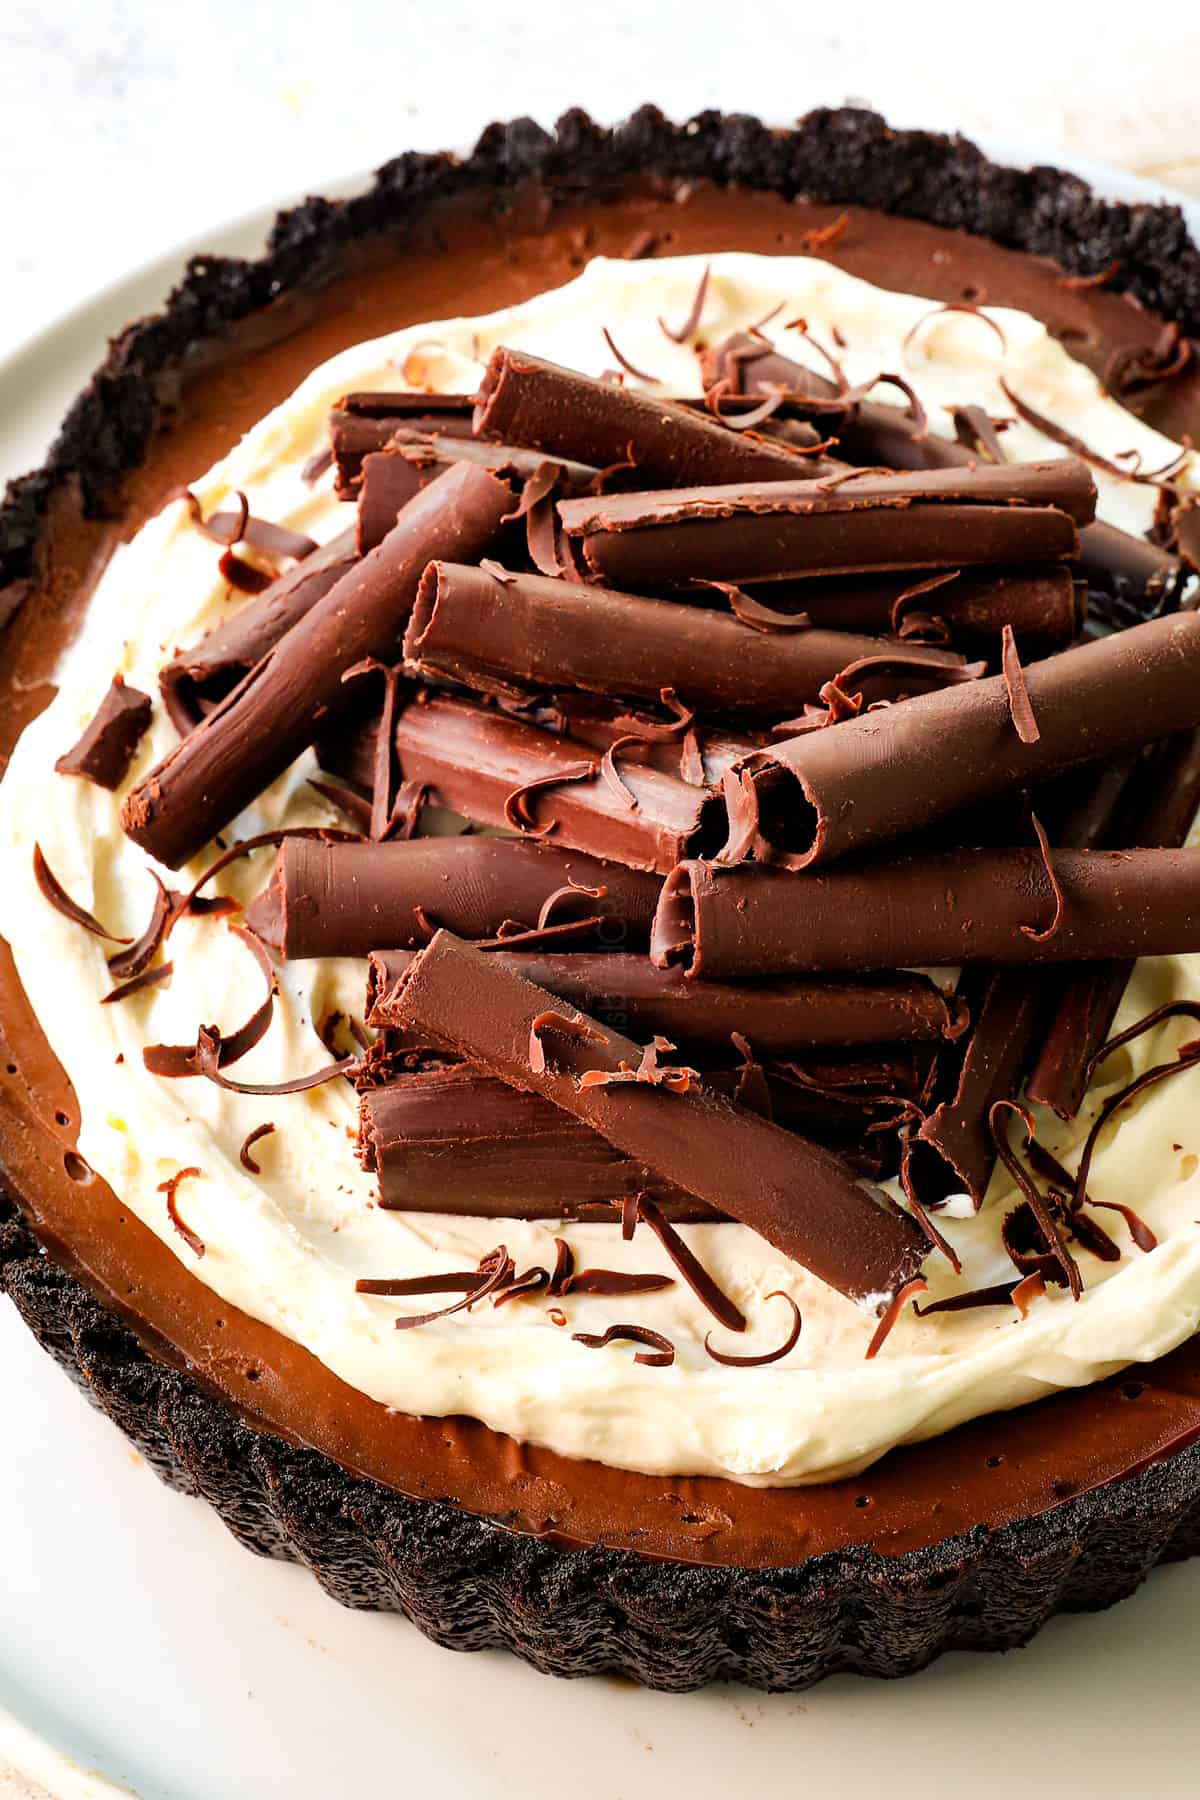 classic chocolate cream pie with whipped cream topping and chocolate shavings and an Oreo crust